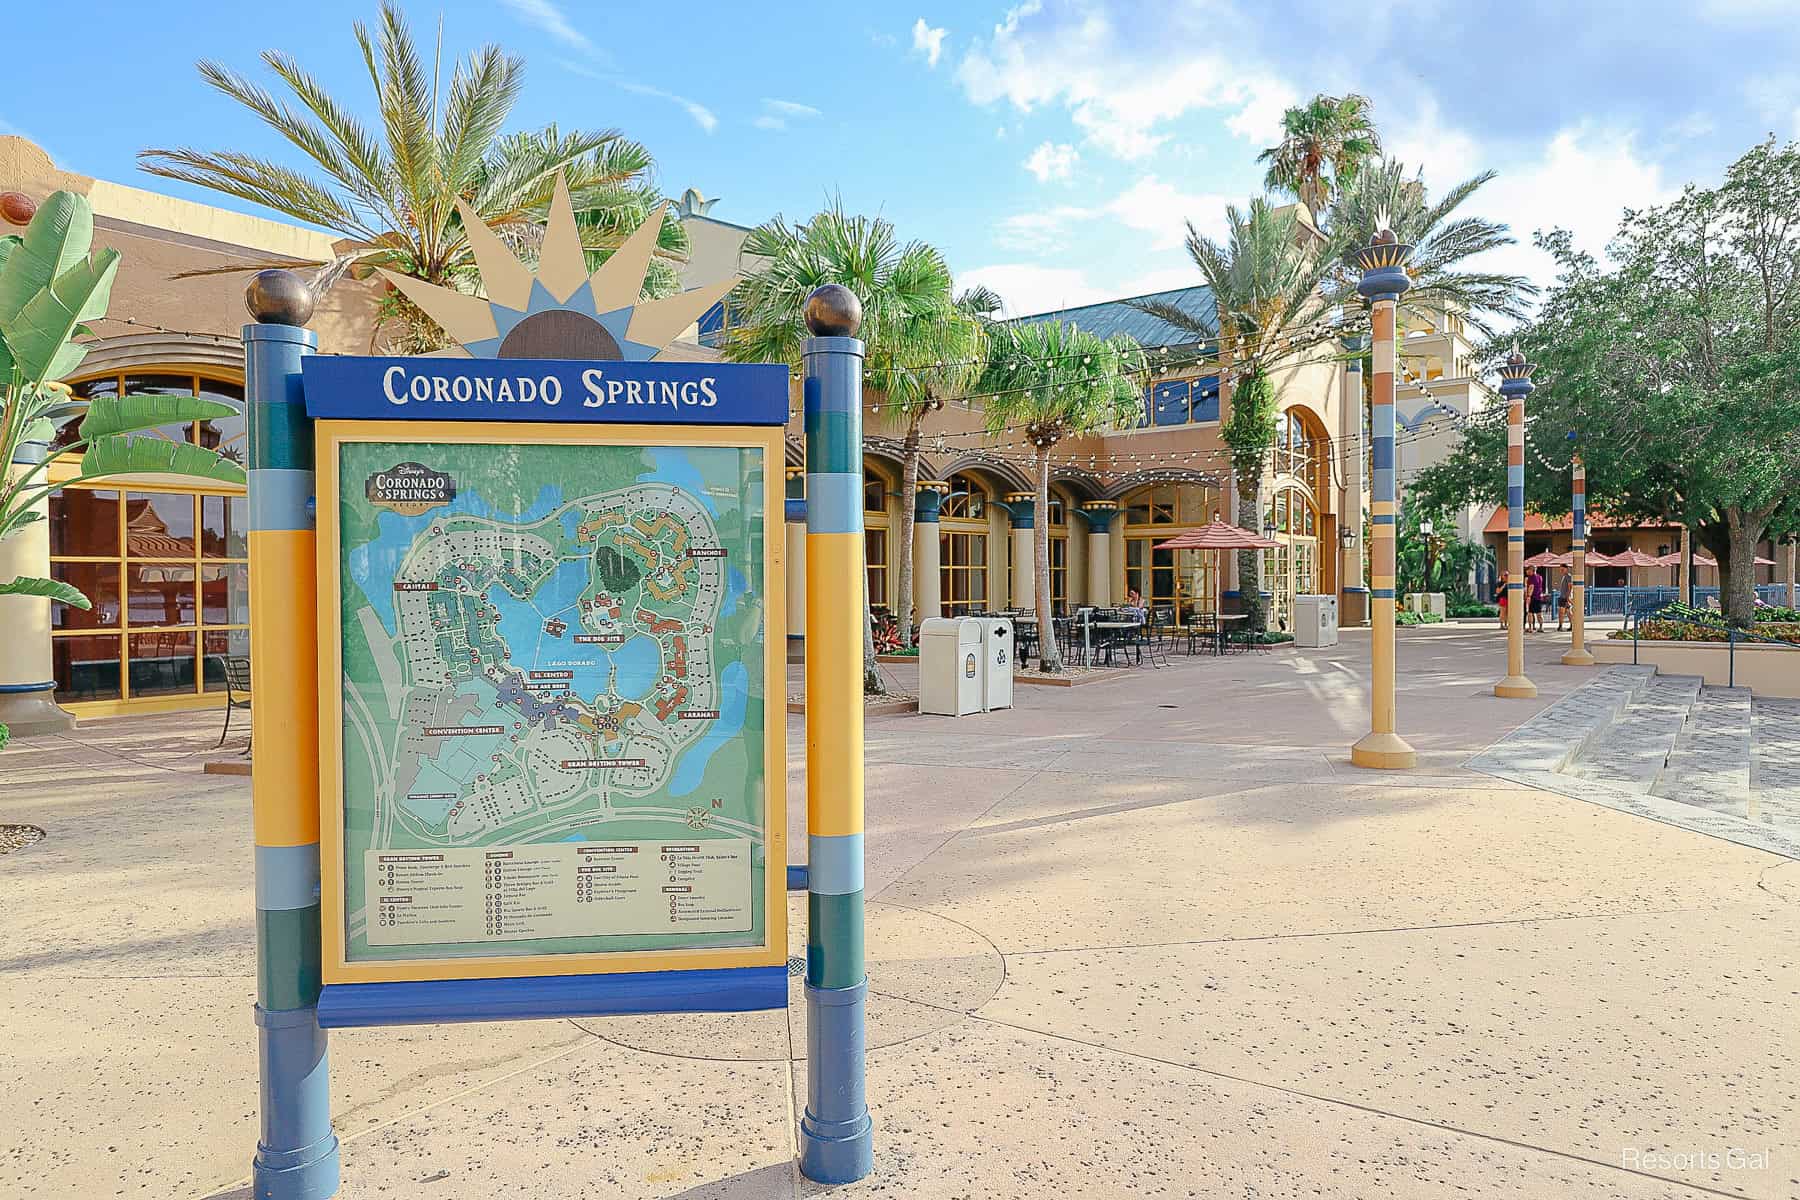 We Tracked Walking Distances at Disney’s Coronado Springs (Here’s What We Found)